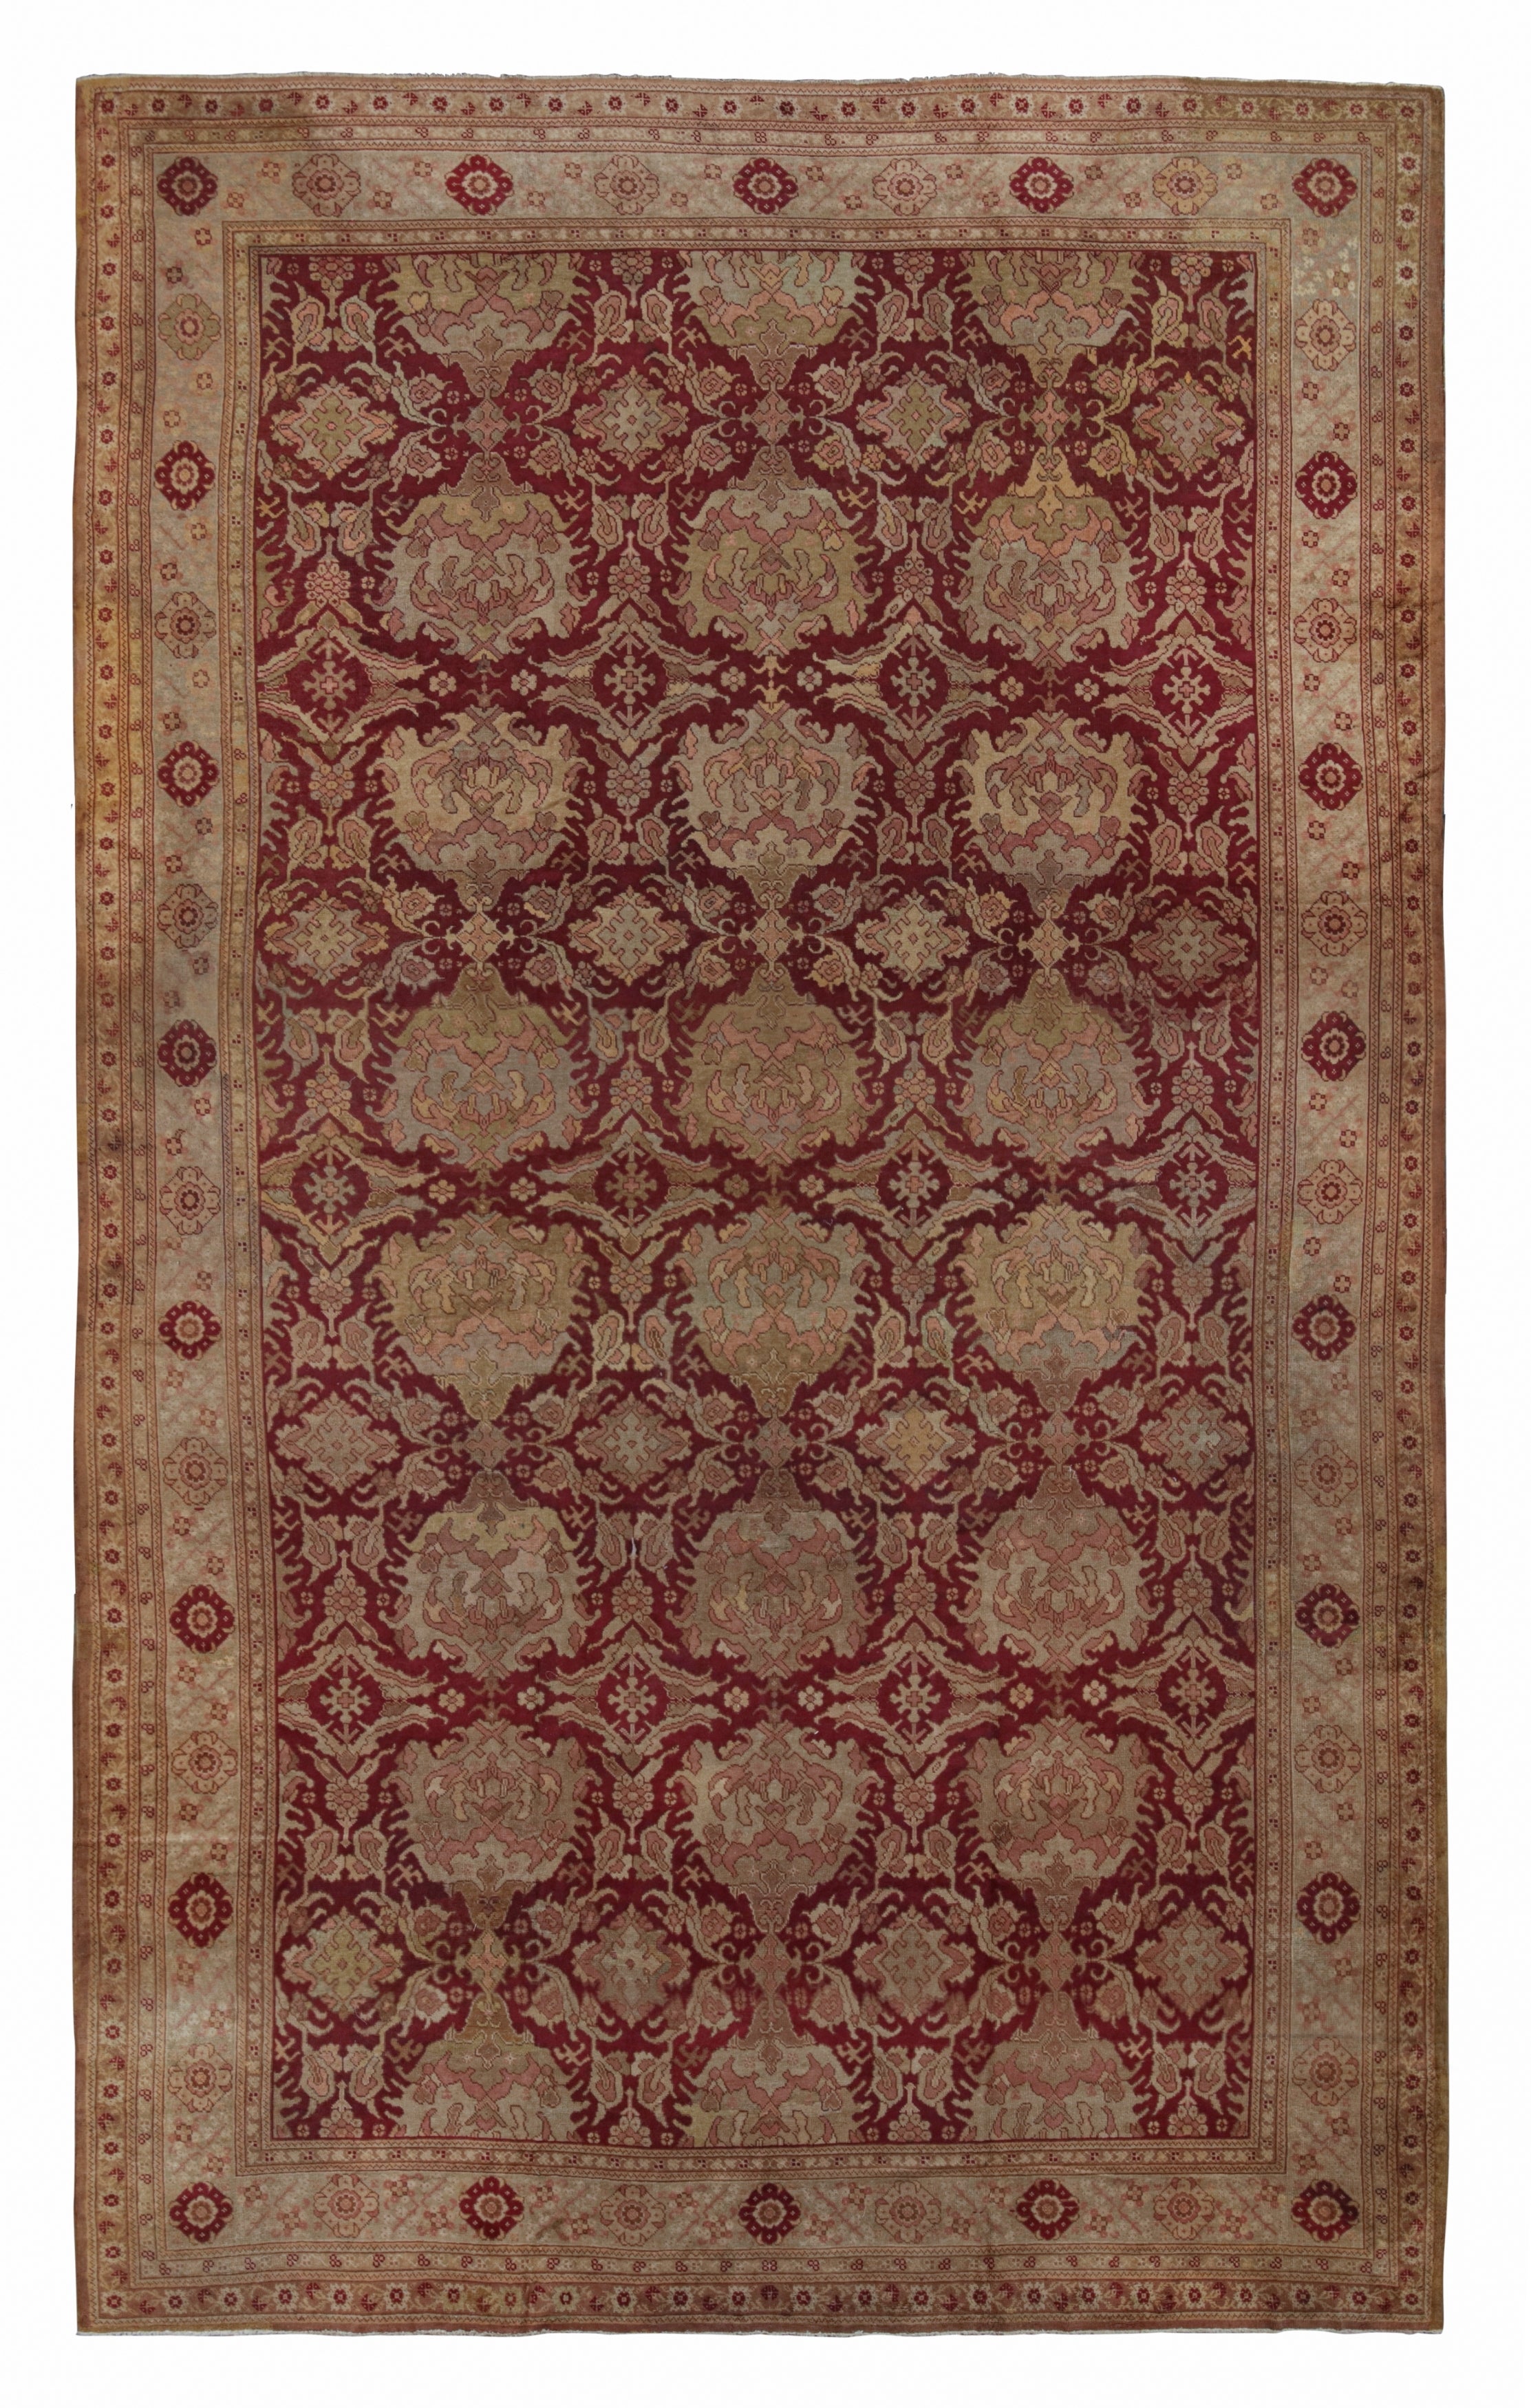 Hand-Knotted Antique Axminster Palace Rug—Red, Beige-Brown, Pink Floral Pattern For Sale